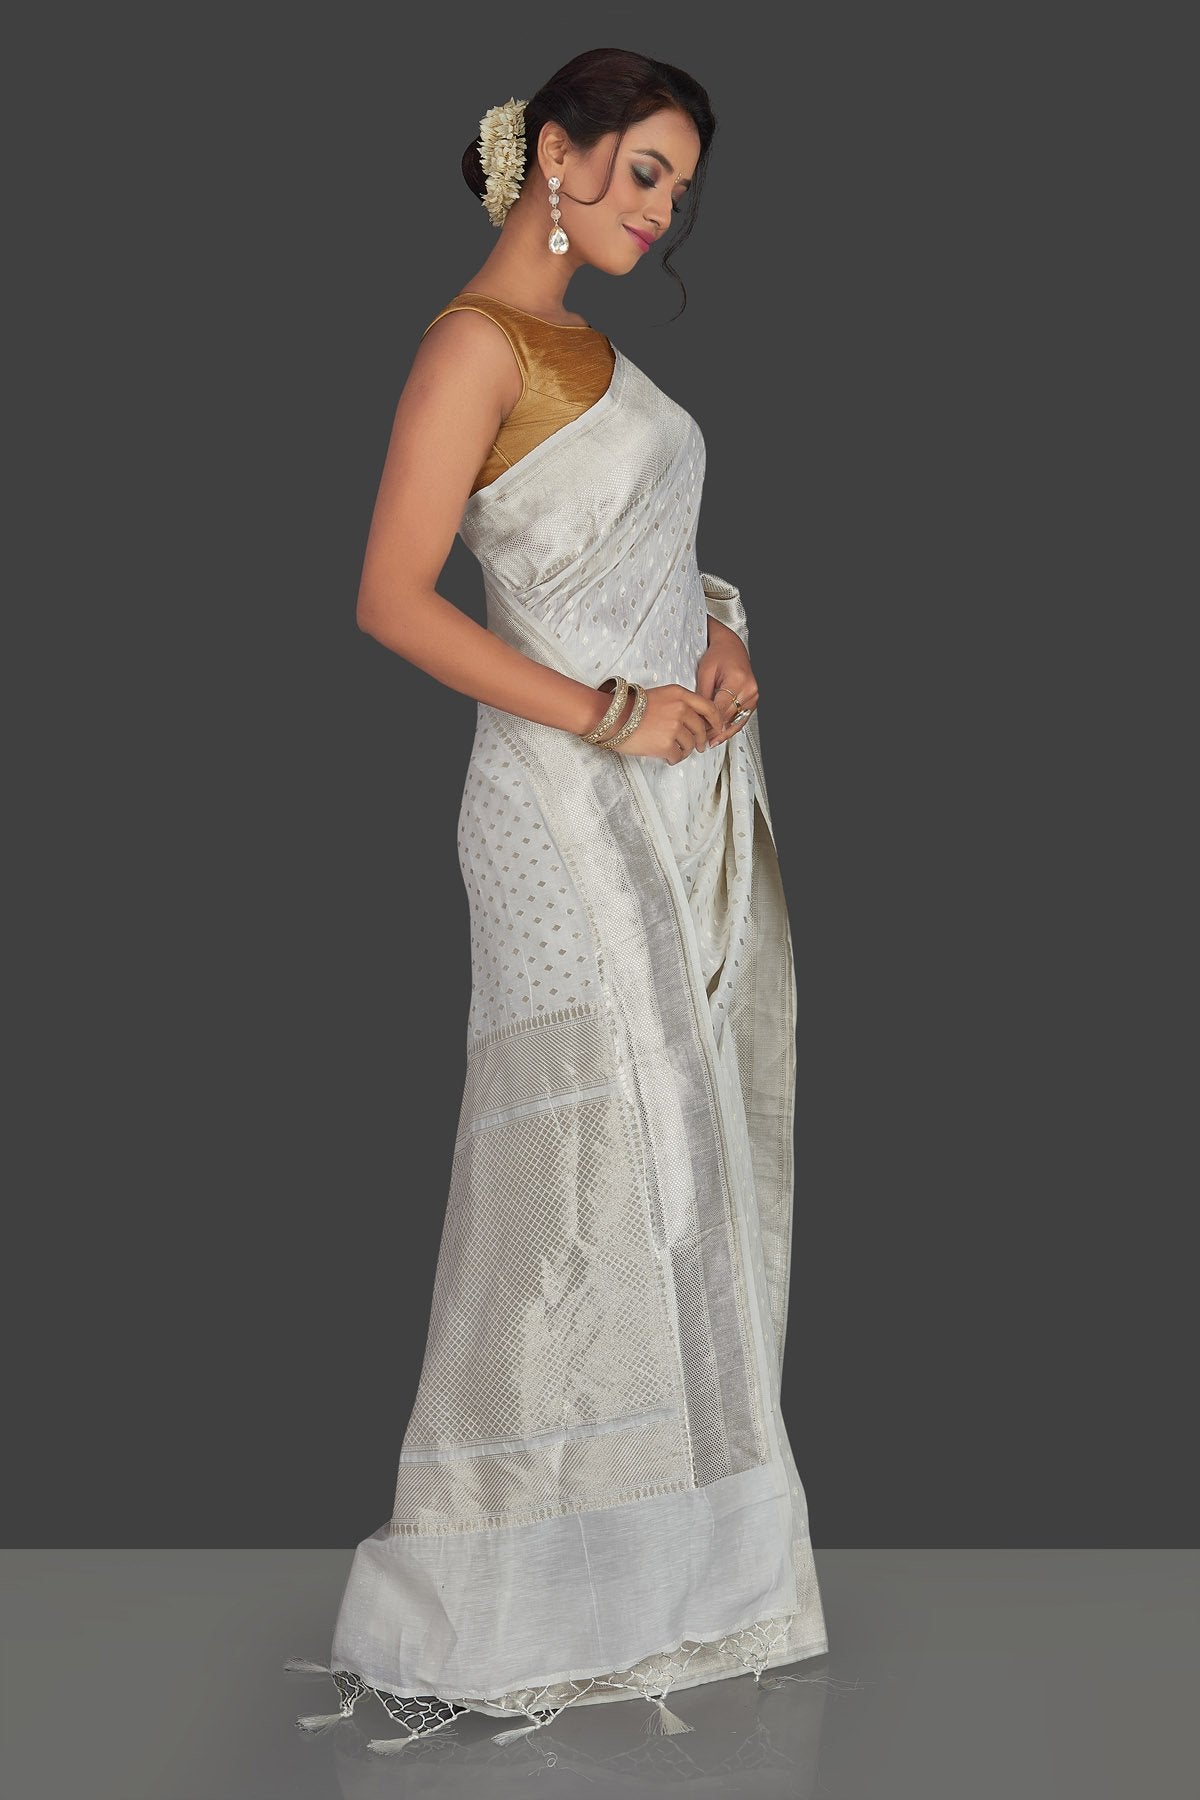 Shop white tassar georgette Banarsi saree online in USA with silver zari border. Radiate elegance with handloom sarees with blouse, tussar silk saris, Banarsi sarees from Pure Elegance Indian fashion boutique in USA. We bring a especially curated collection of ethnic saris for Indian women in USA under one roof!-side